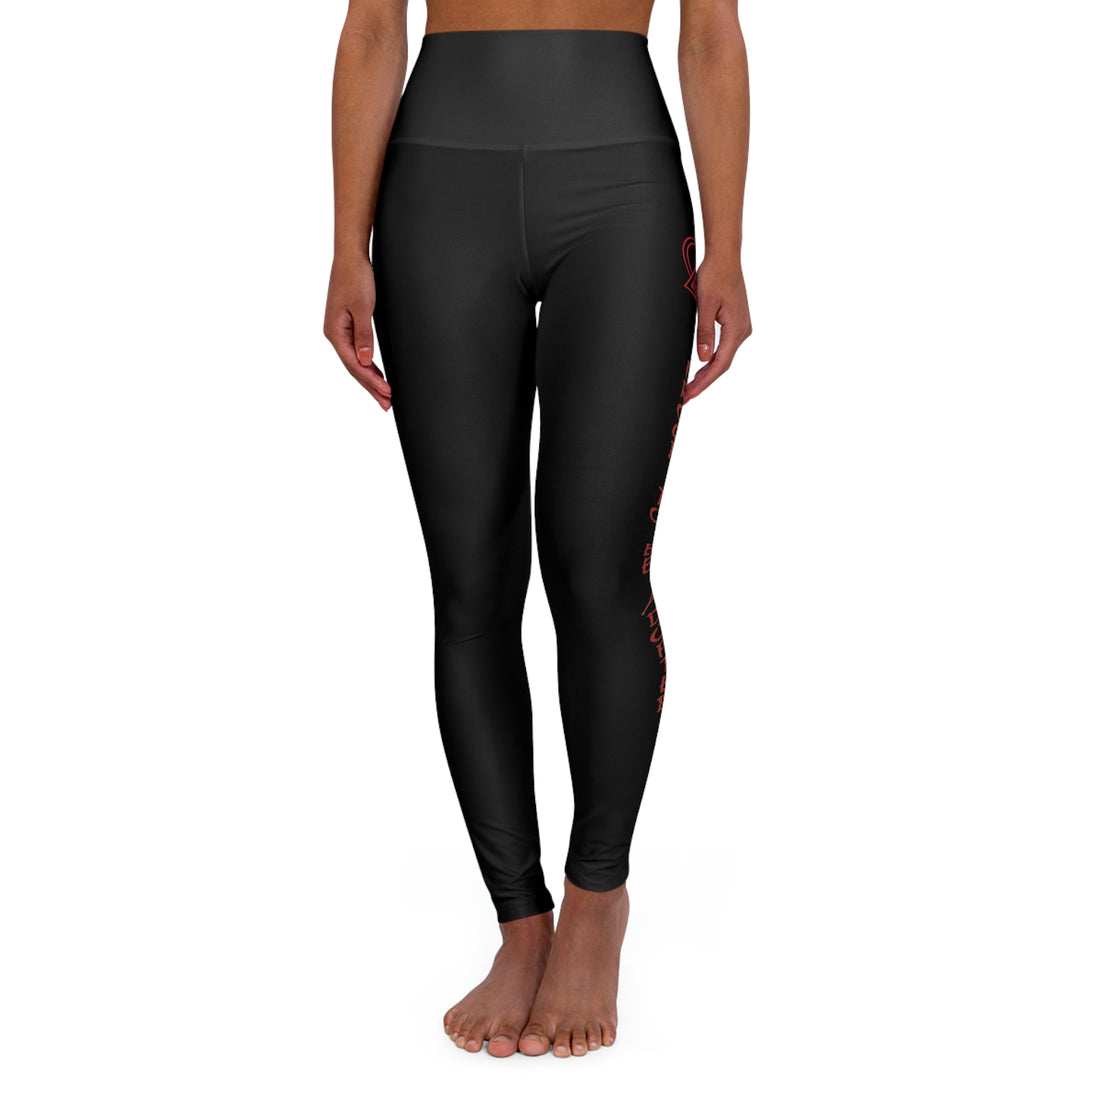 Proud to be Adopted - Black High Waisted Yoga Leggings